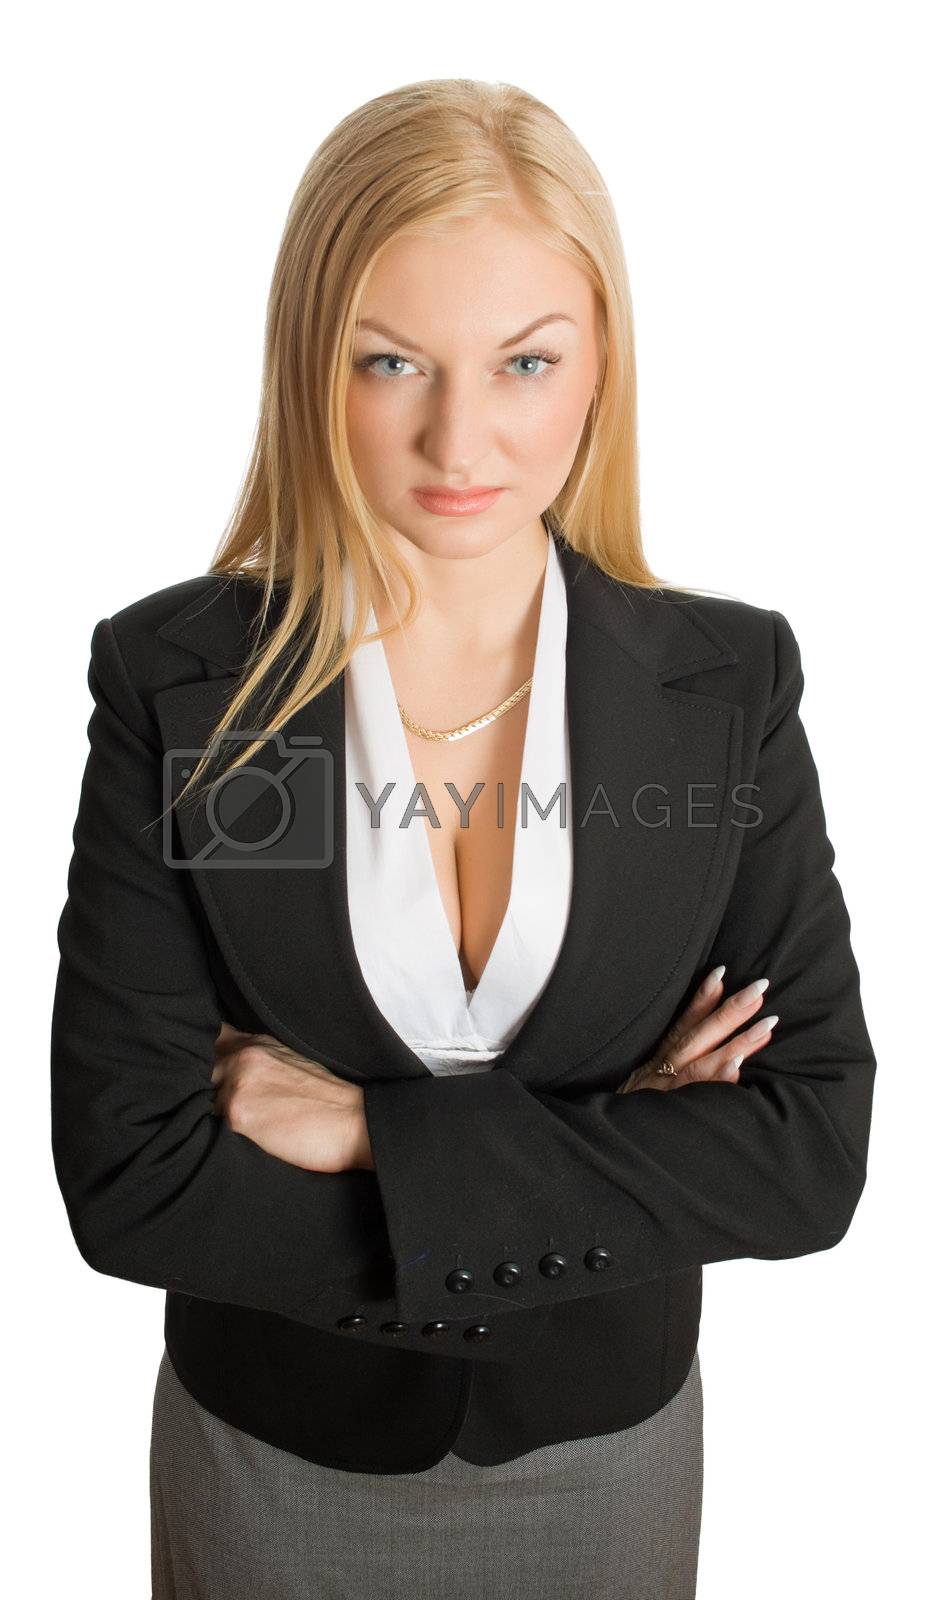 Royalty free image of businesswoman fold her arms by AndyTu